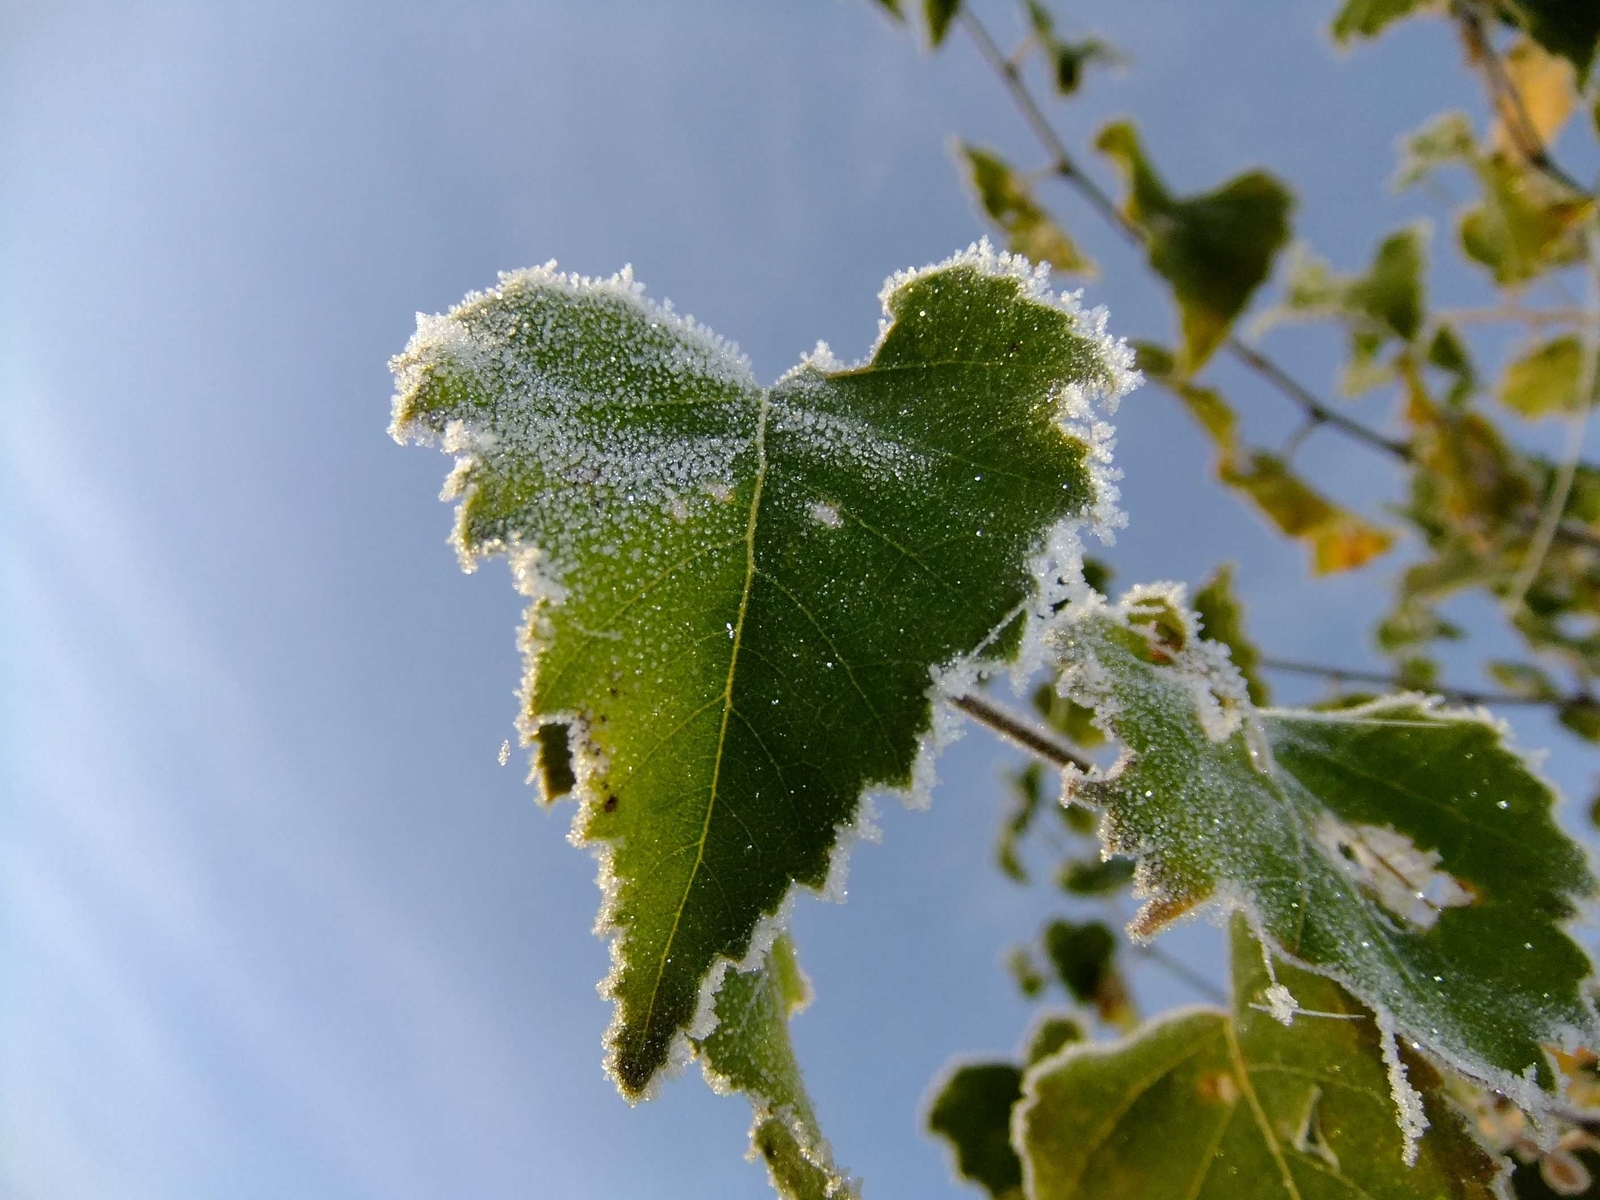 Image: Leaves, green, frost, sky